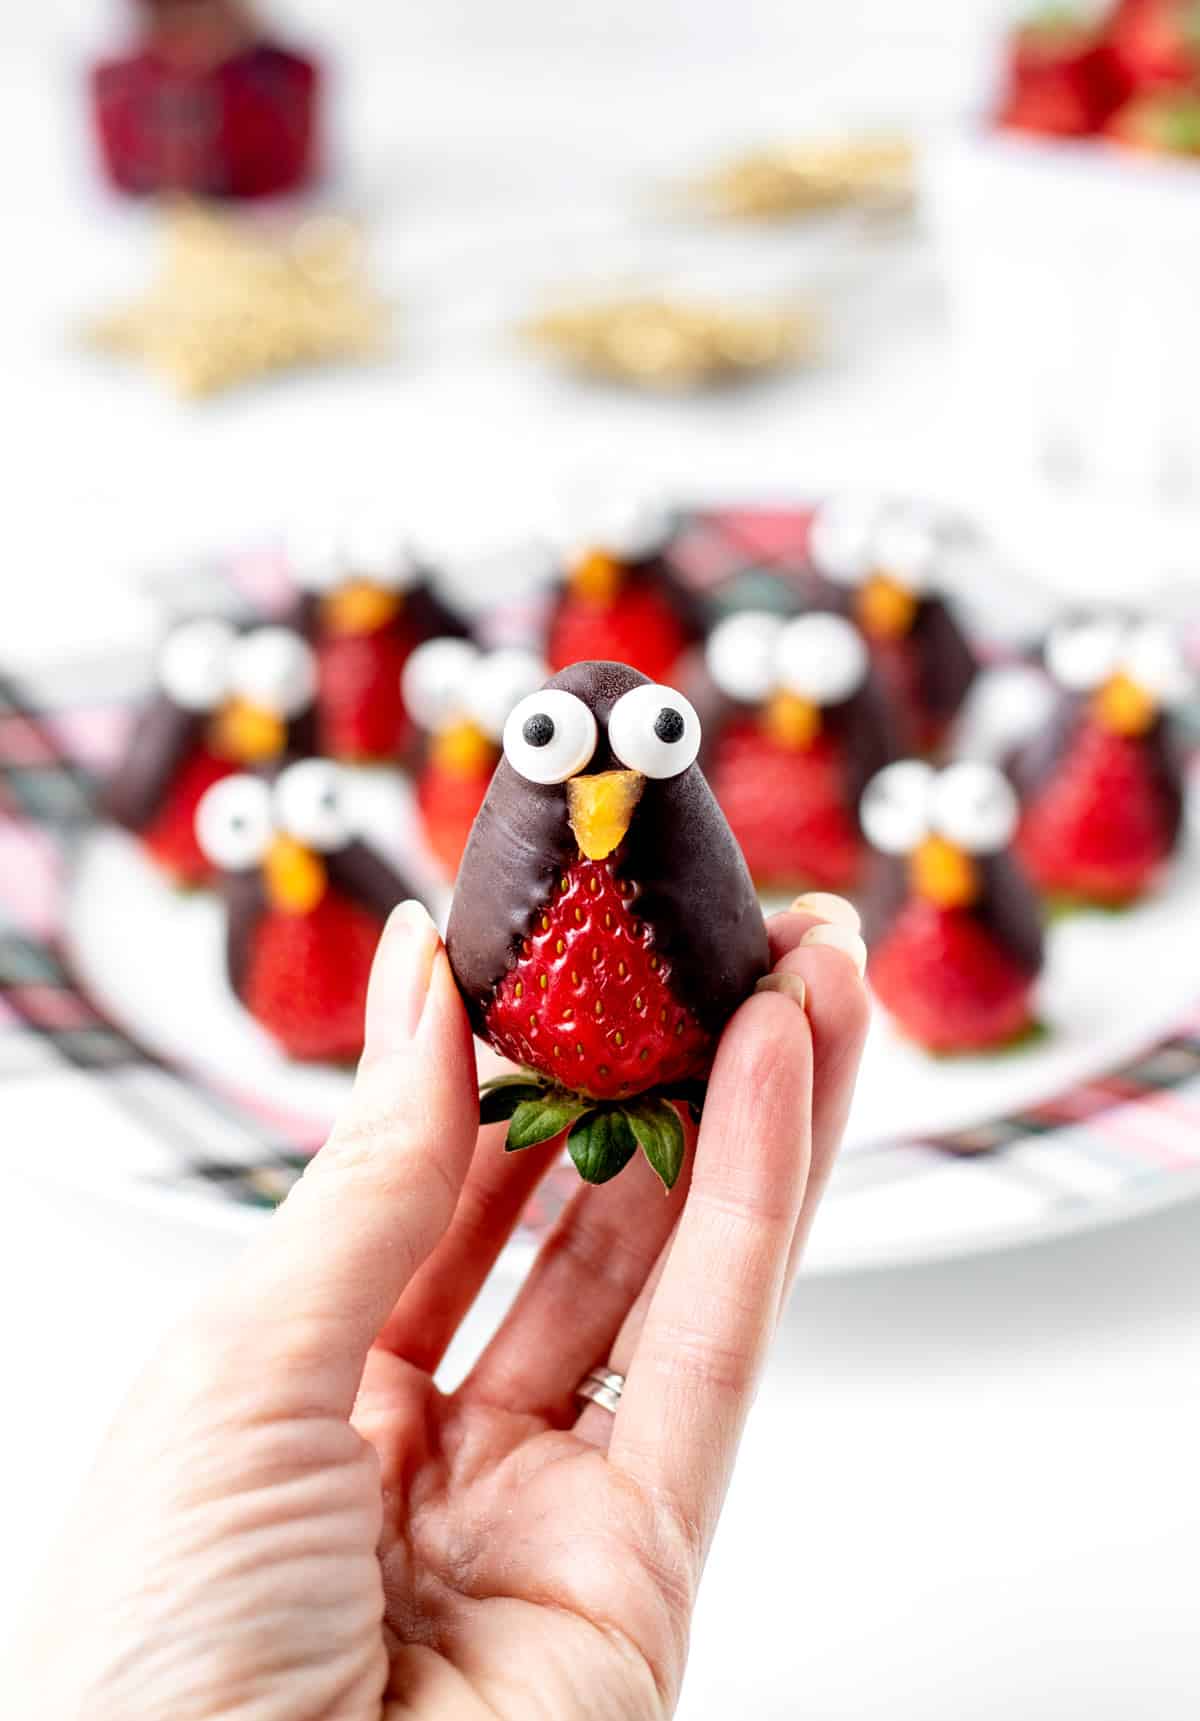 A close-up of a strawberry penguin being held in someone's hand.